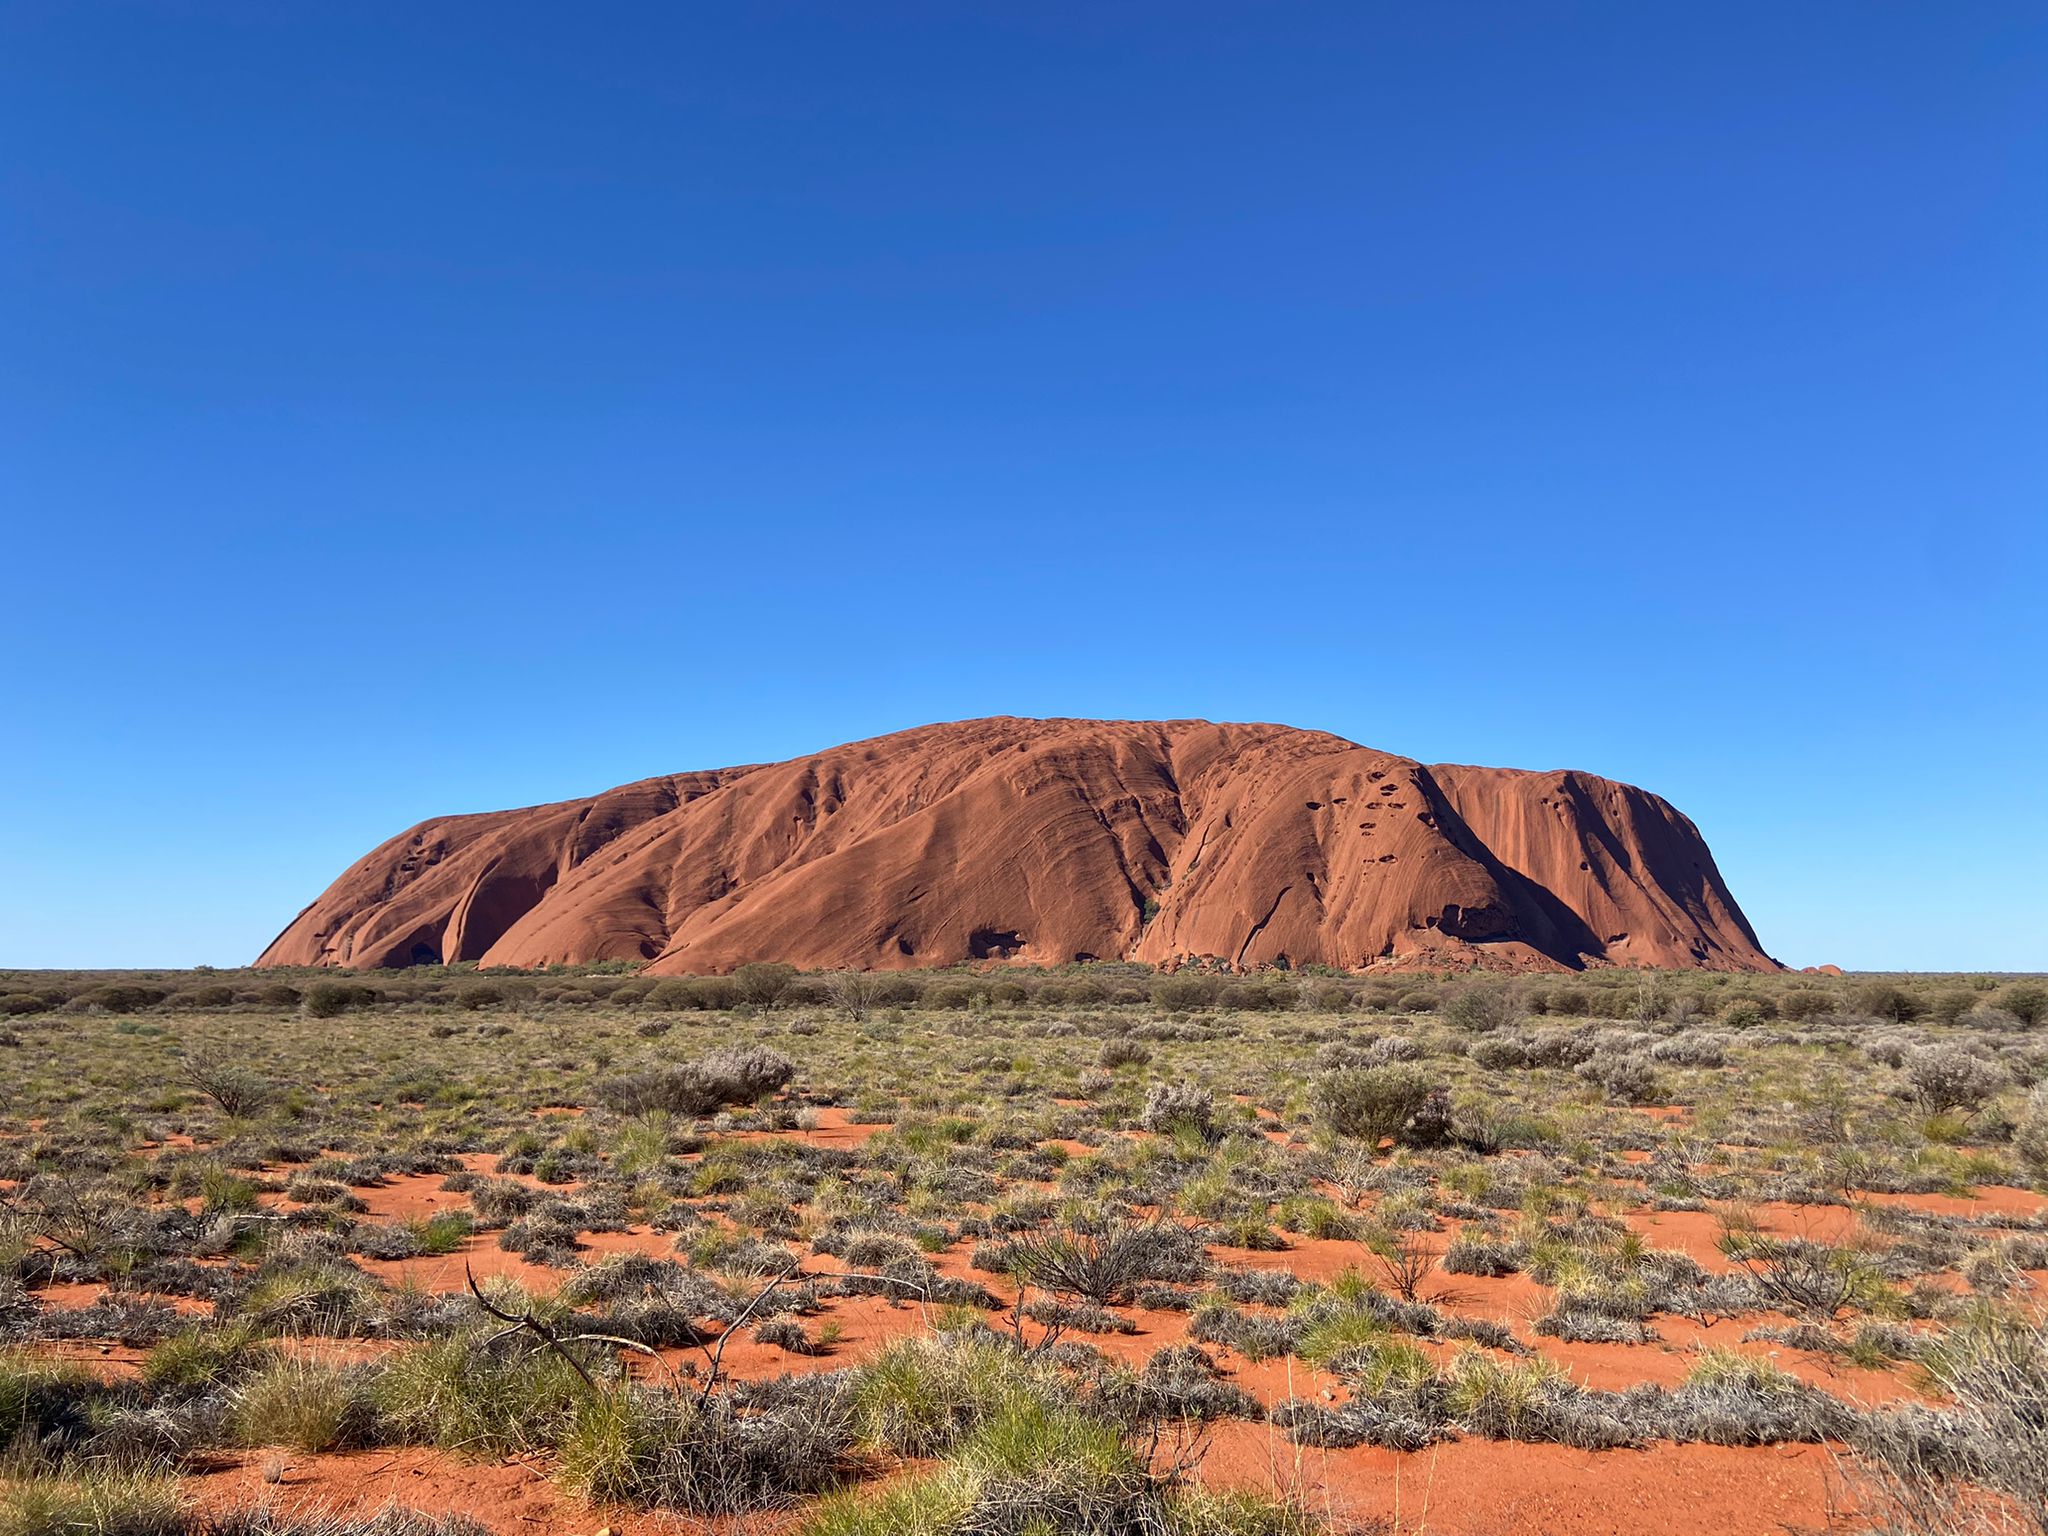 A landscape view of Uluru during the day with red sand and scattered green bushes in front of it